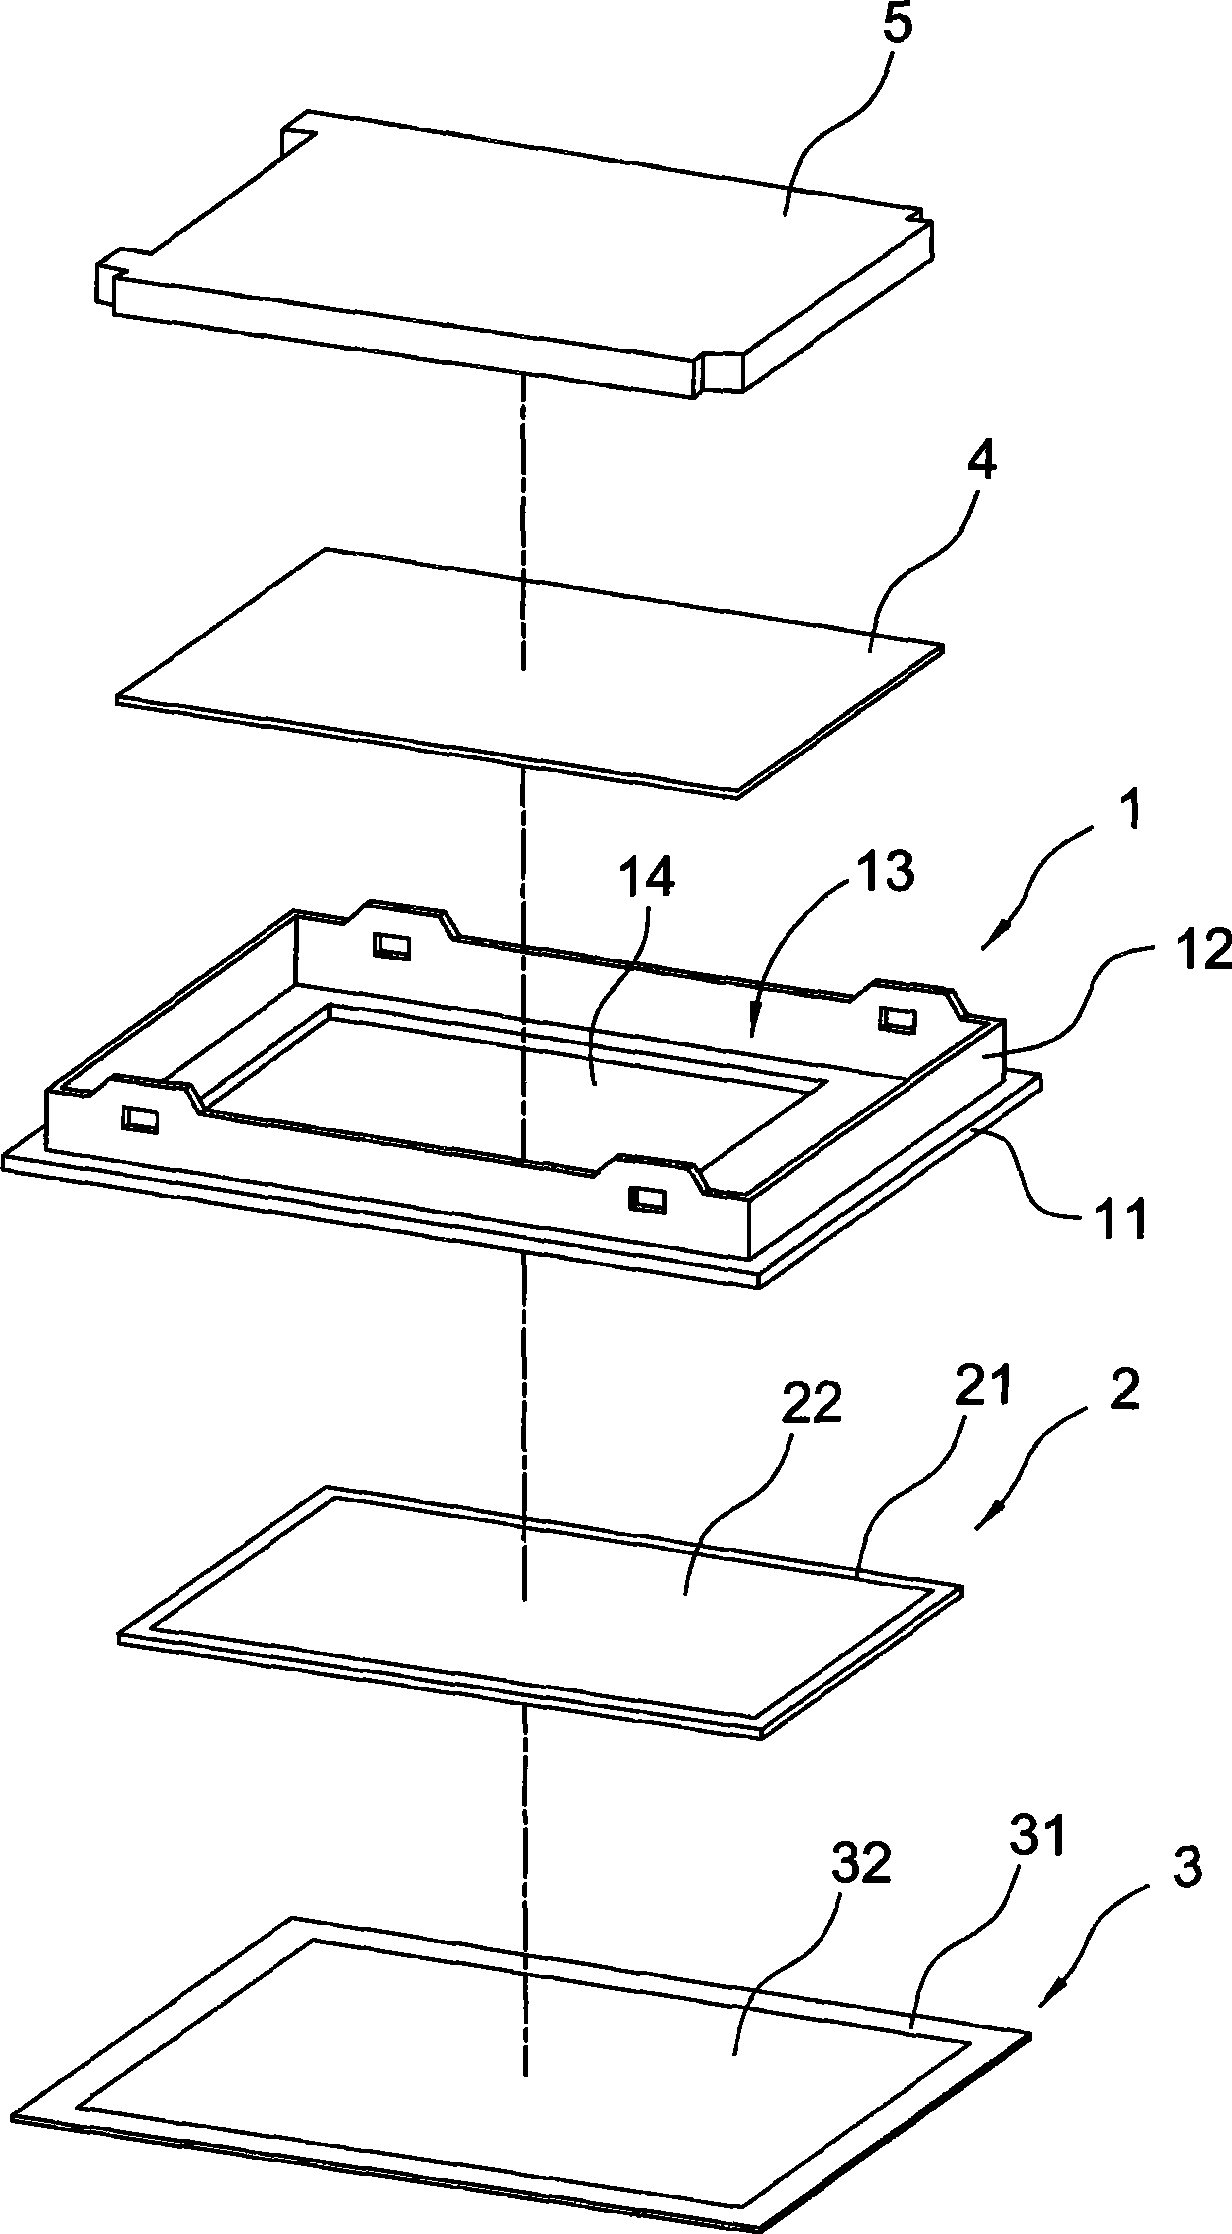 LCD device preventing water vapor generating